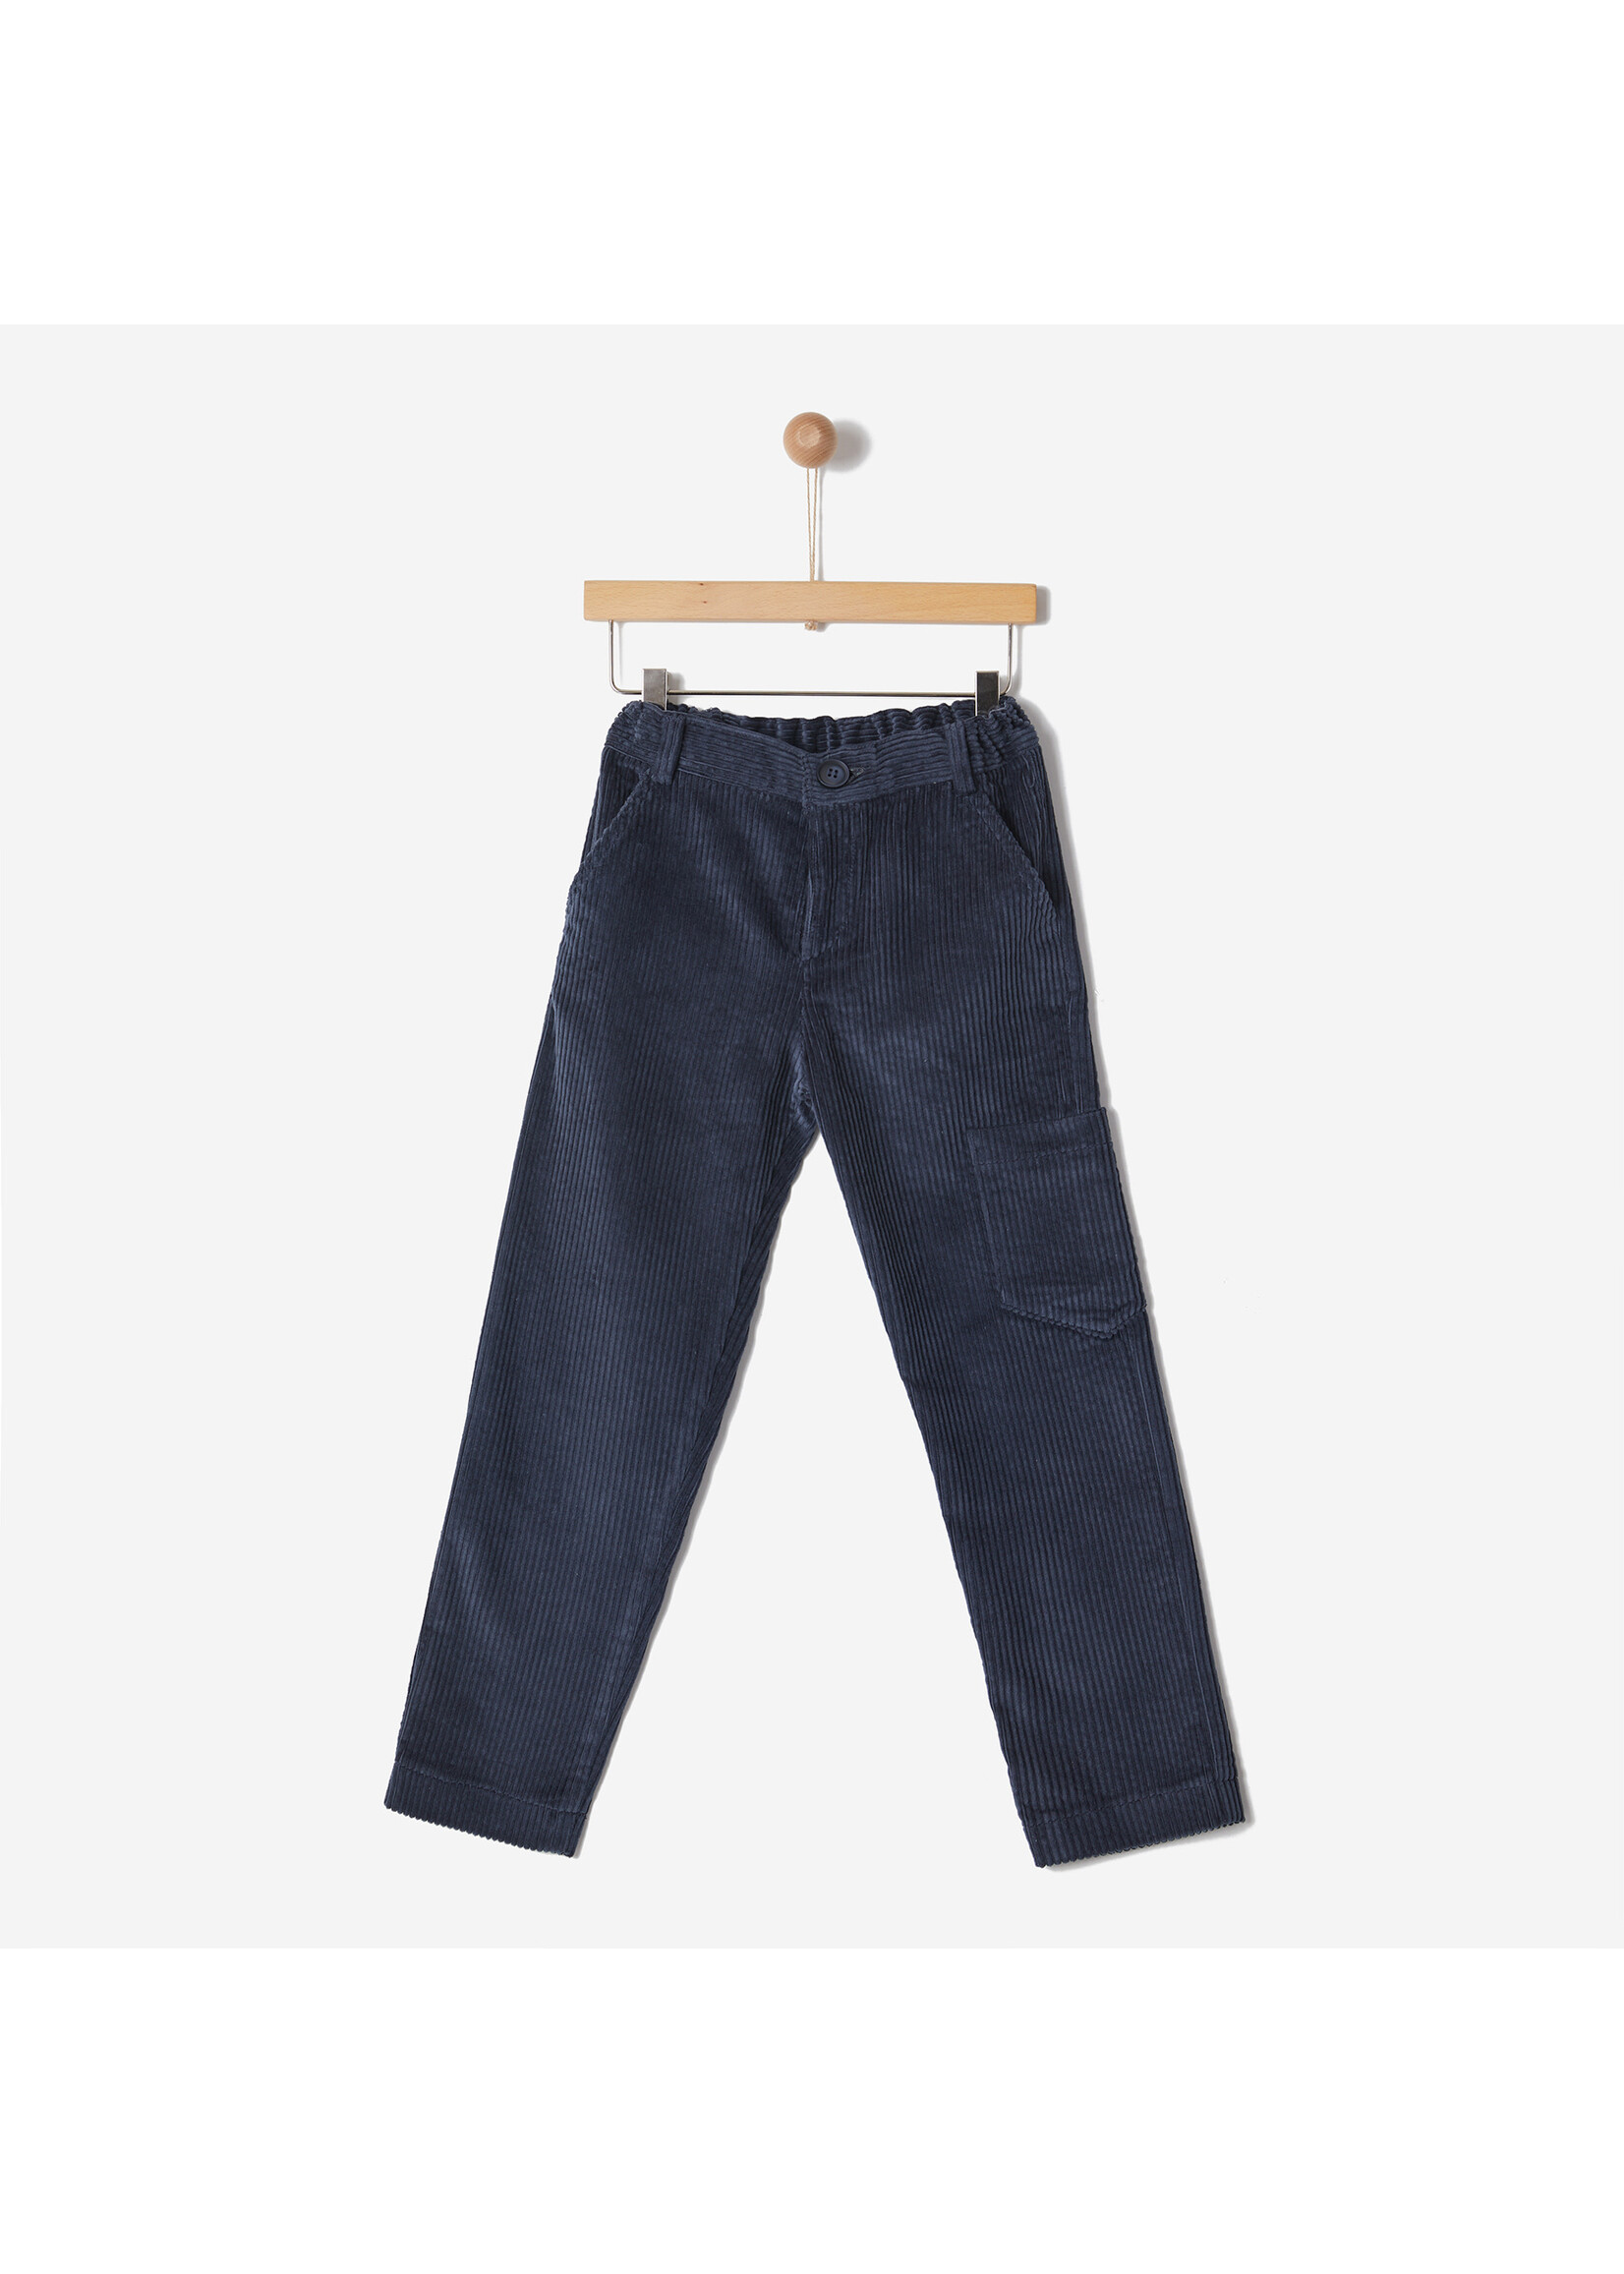 YELL OH! YELL OH! - CORD CHINOS TROUSERS IN COTTON BLUE